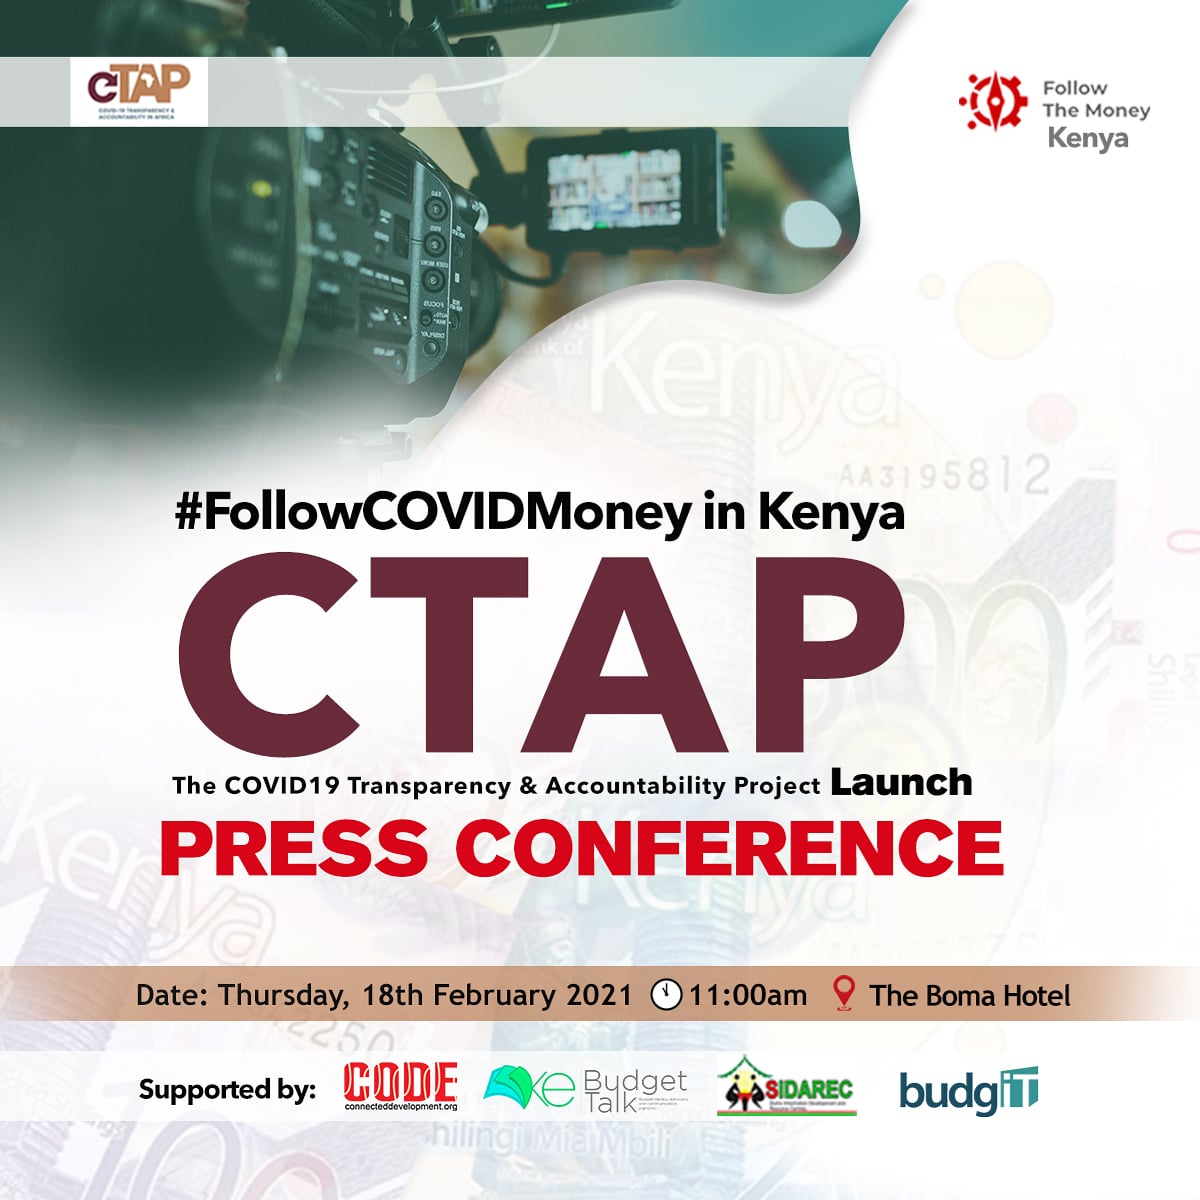 The launch of the #COVID19 Transparency & Accountability Project (#CTAP) campaign initiative takes place today. #FollowCOVIDMoneyKenya campaign aims to track allocation and expenditure of #COVID19. @4lowthemoney @Connected_dev @BudgITng @GlobalIntegrity #KeBudgetTalk